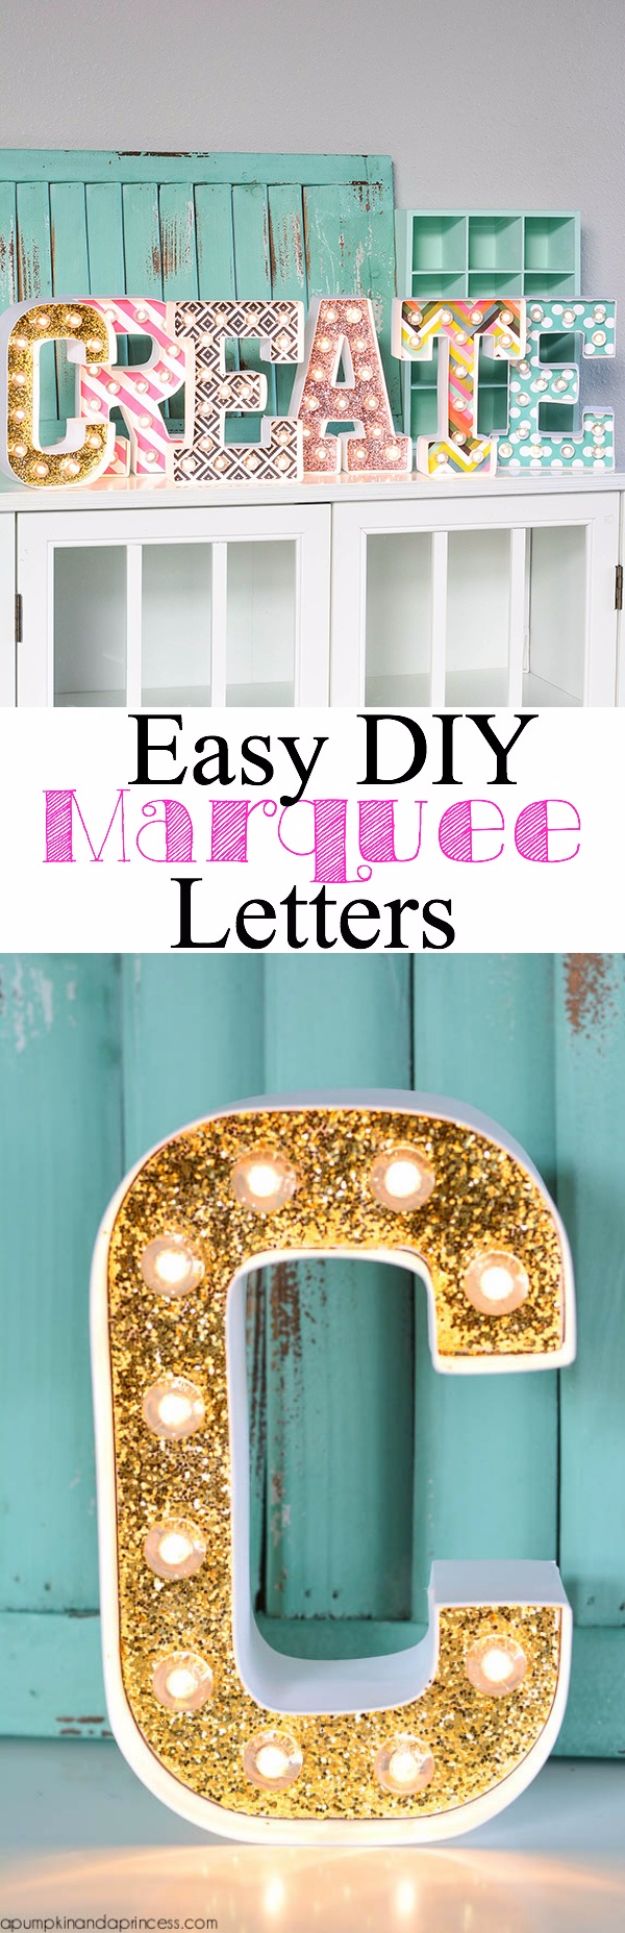 To Decorate Your Home With Diy Signs